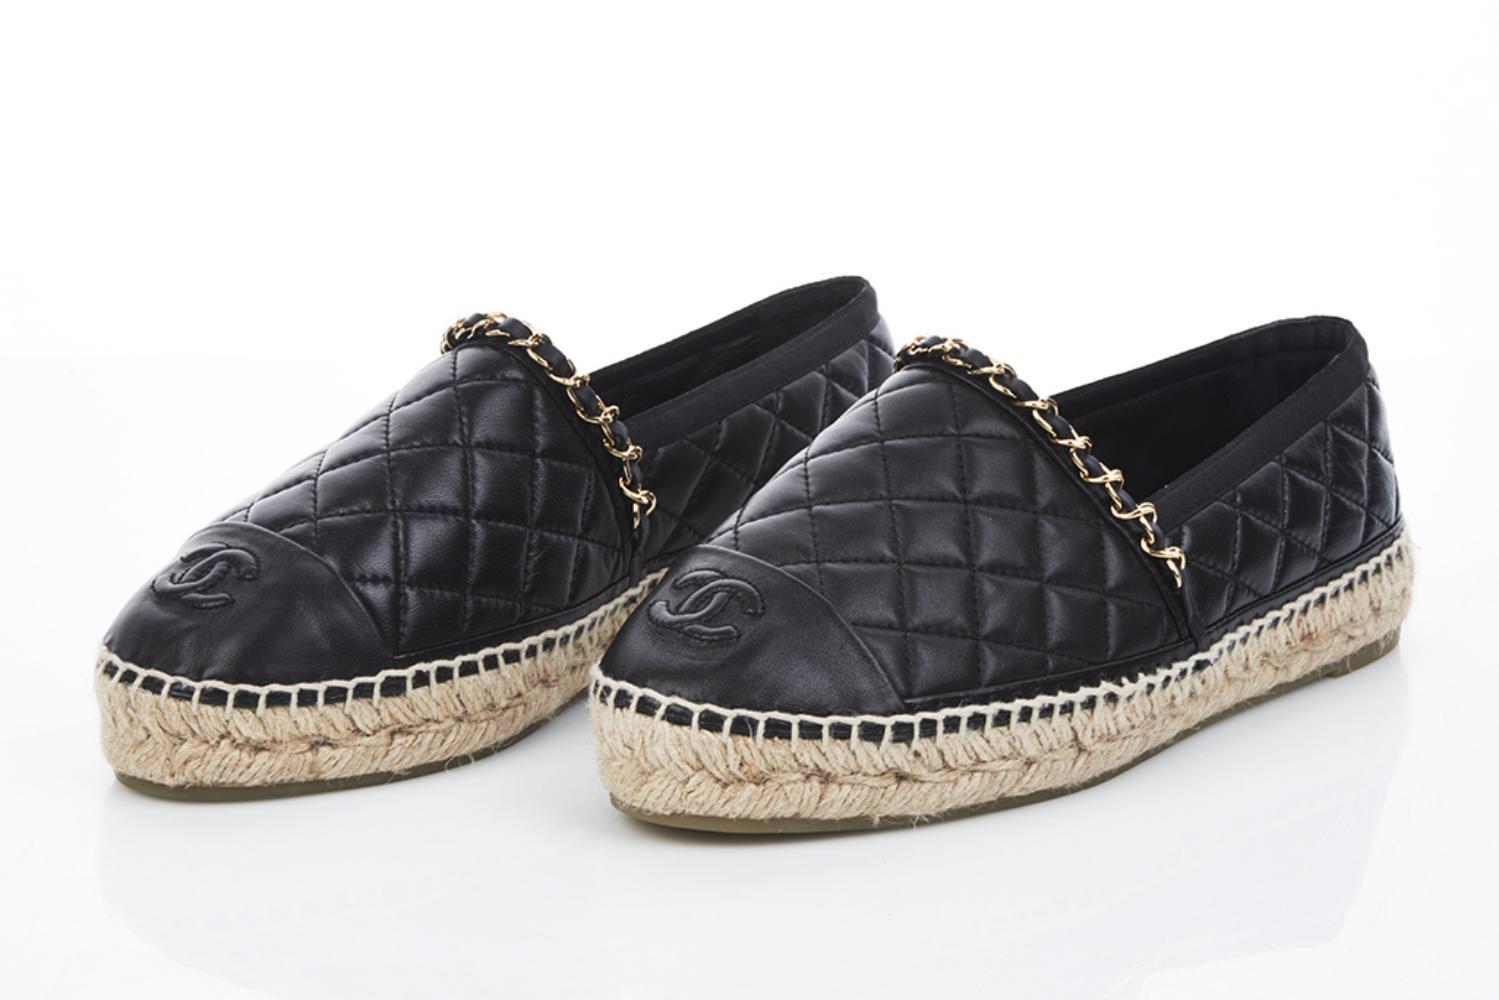 Authentic Chanel Espadrilles in black - Bagful of Goodies